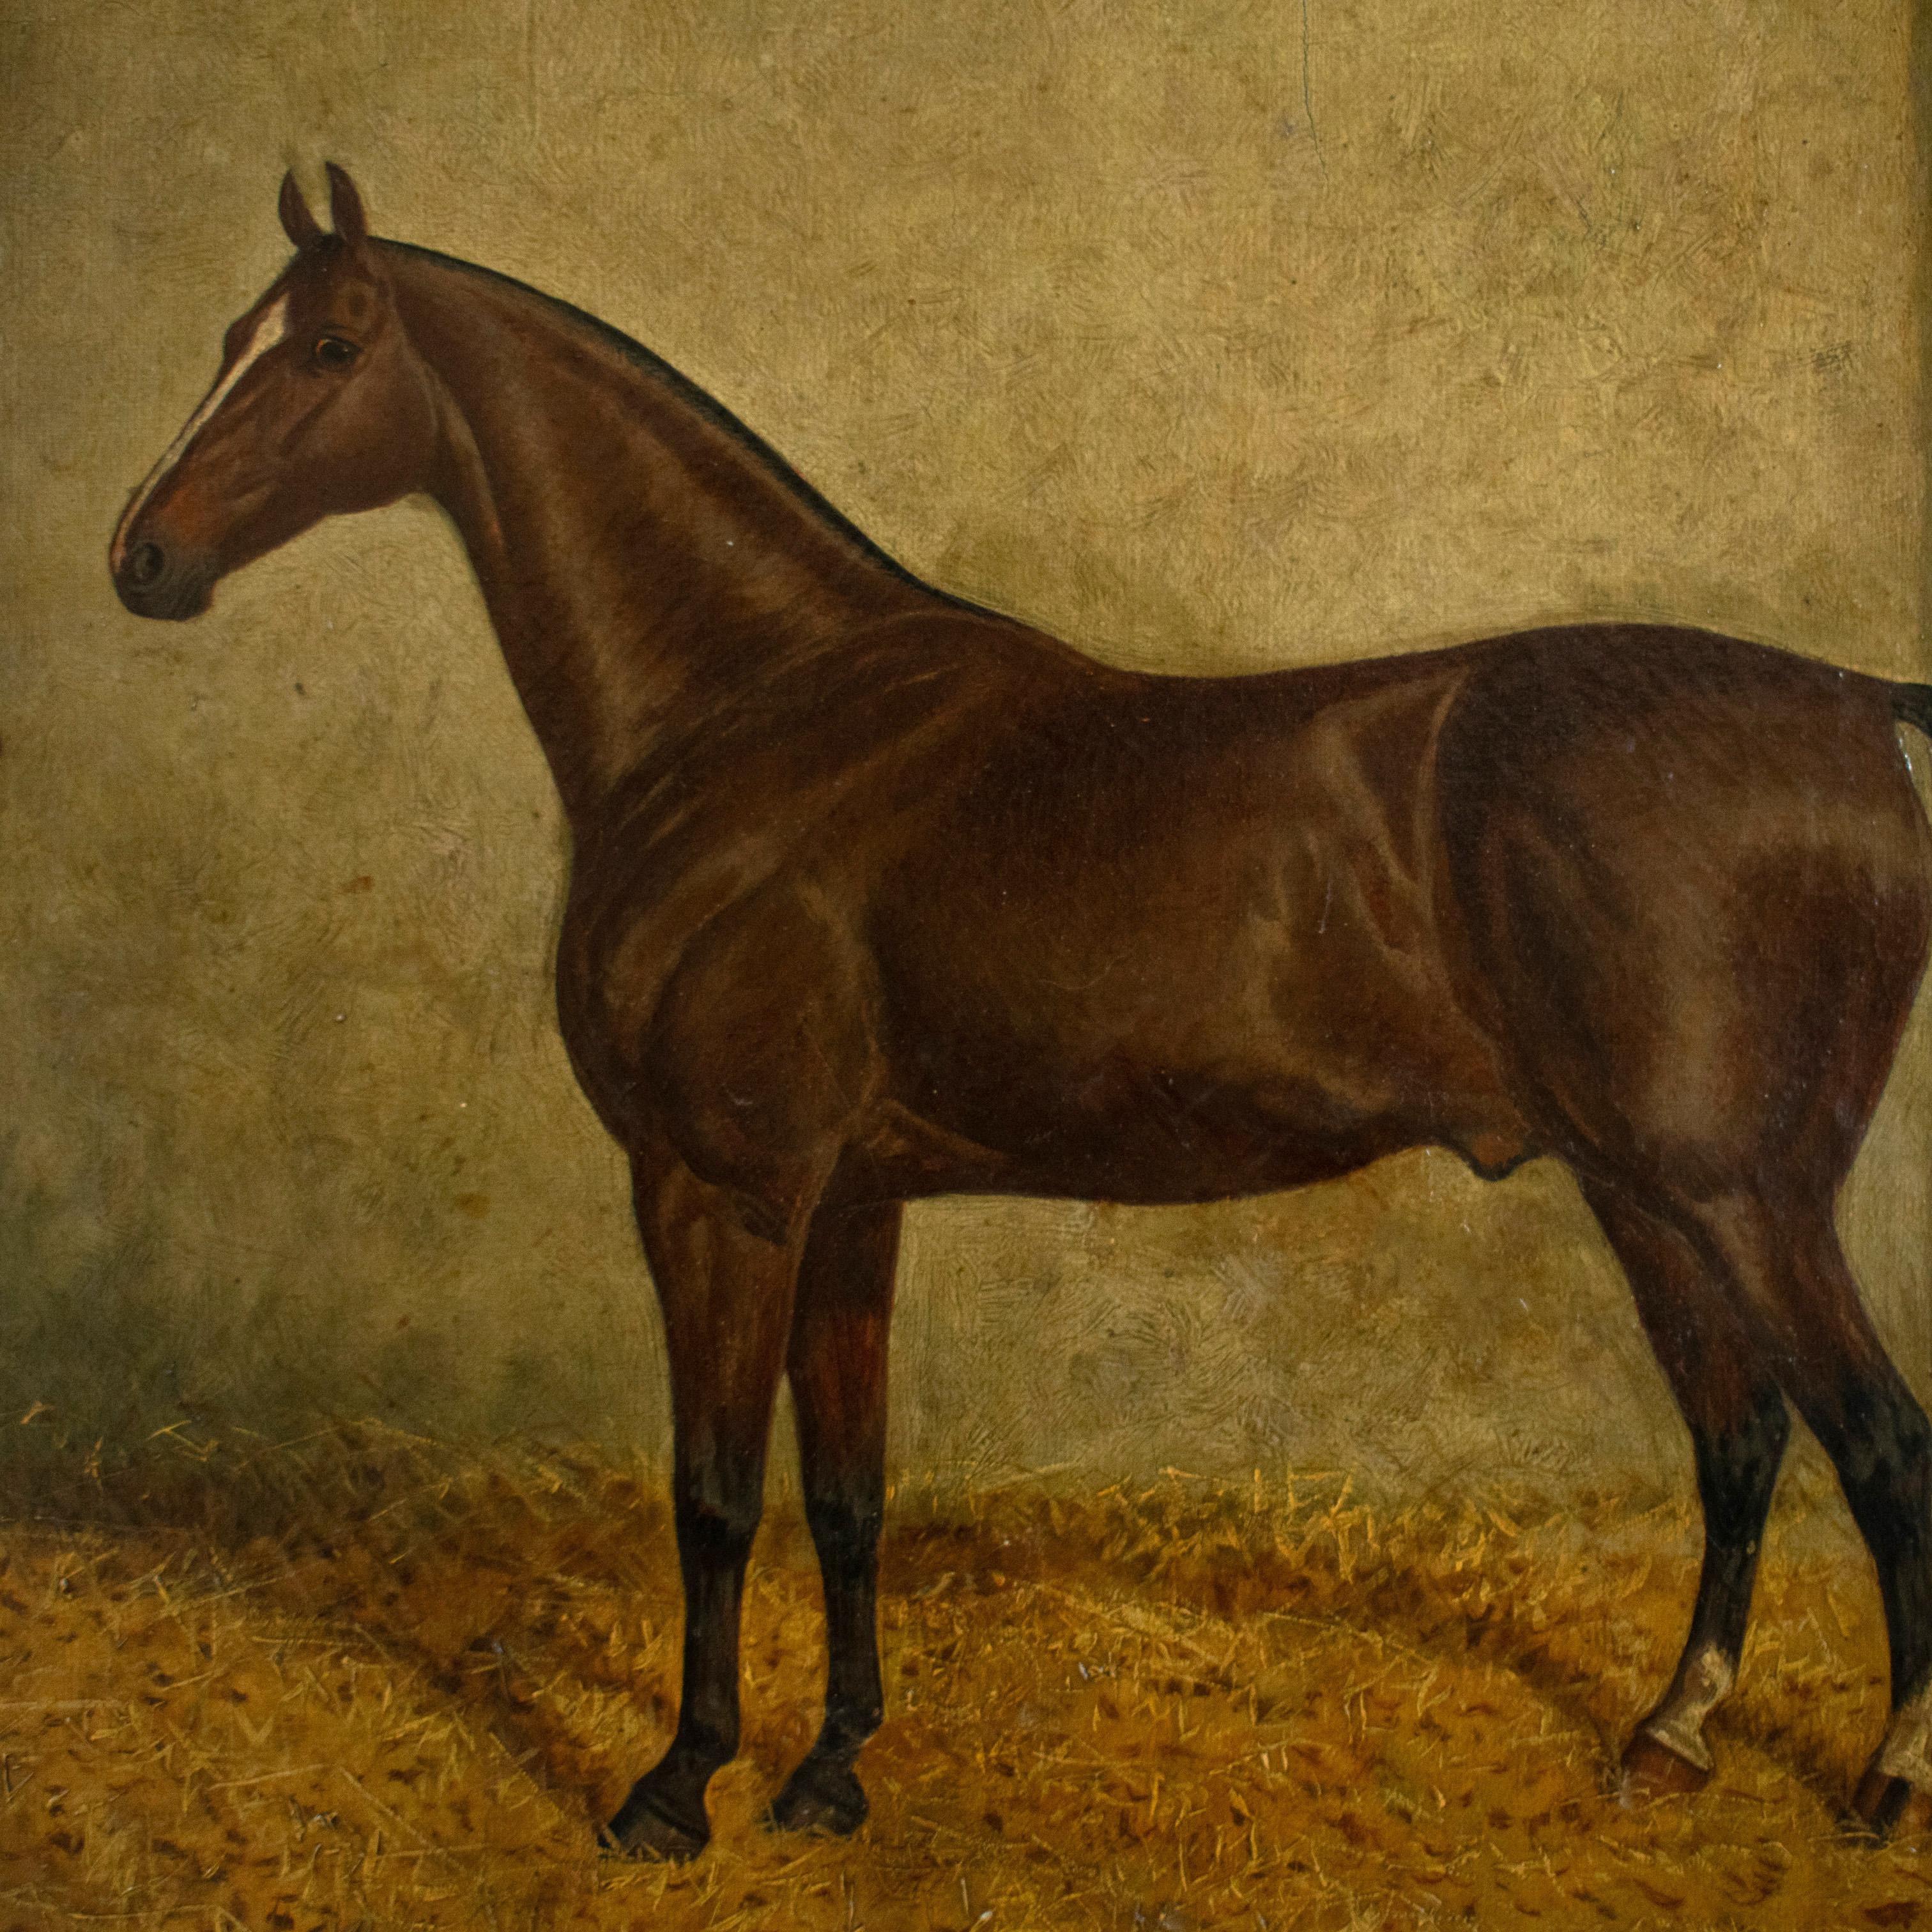 ALBERT CLARK dated 1900 - Oil on Canvas Portrait of the horse 'Jimmy M'.

In his familiar style the artist Albert Clark has portrayed the bay horse known as Jimmy M in his stable with a rug thrown over the manger, bearing the initials of the owner,